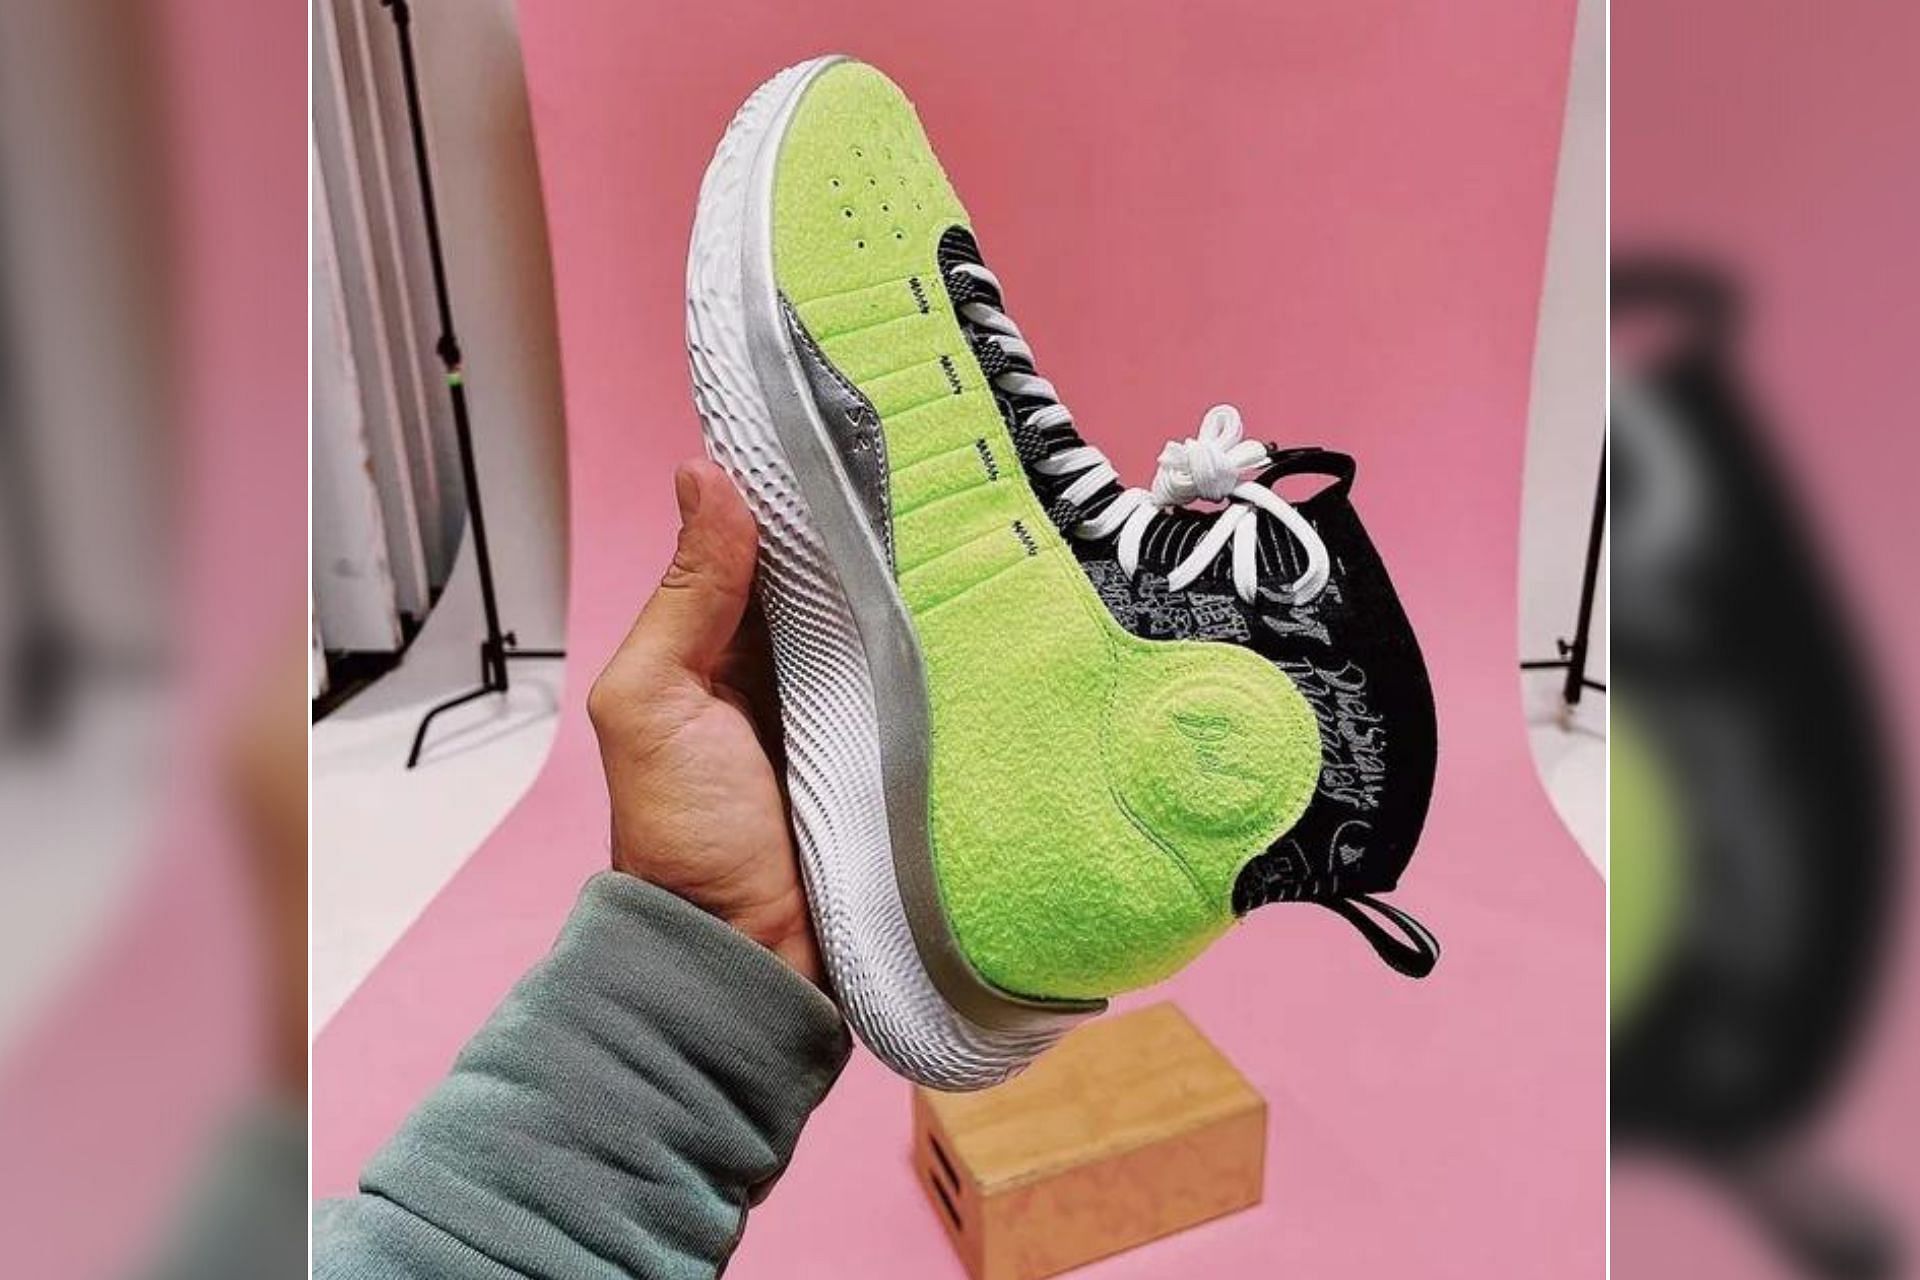 The upcoming Stephen Curry x Under Armour x Diet Starts Monday &quot;Tennis Ball&quot; sneakers will be released in a limited amount of 100 pairs (Image via @bballshoes/Reddit)